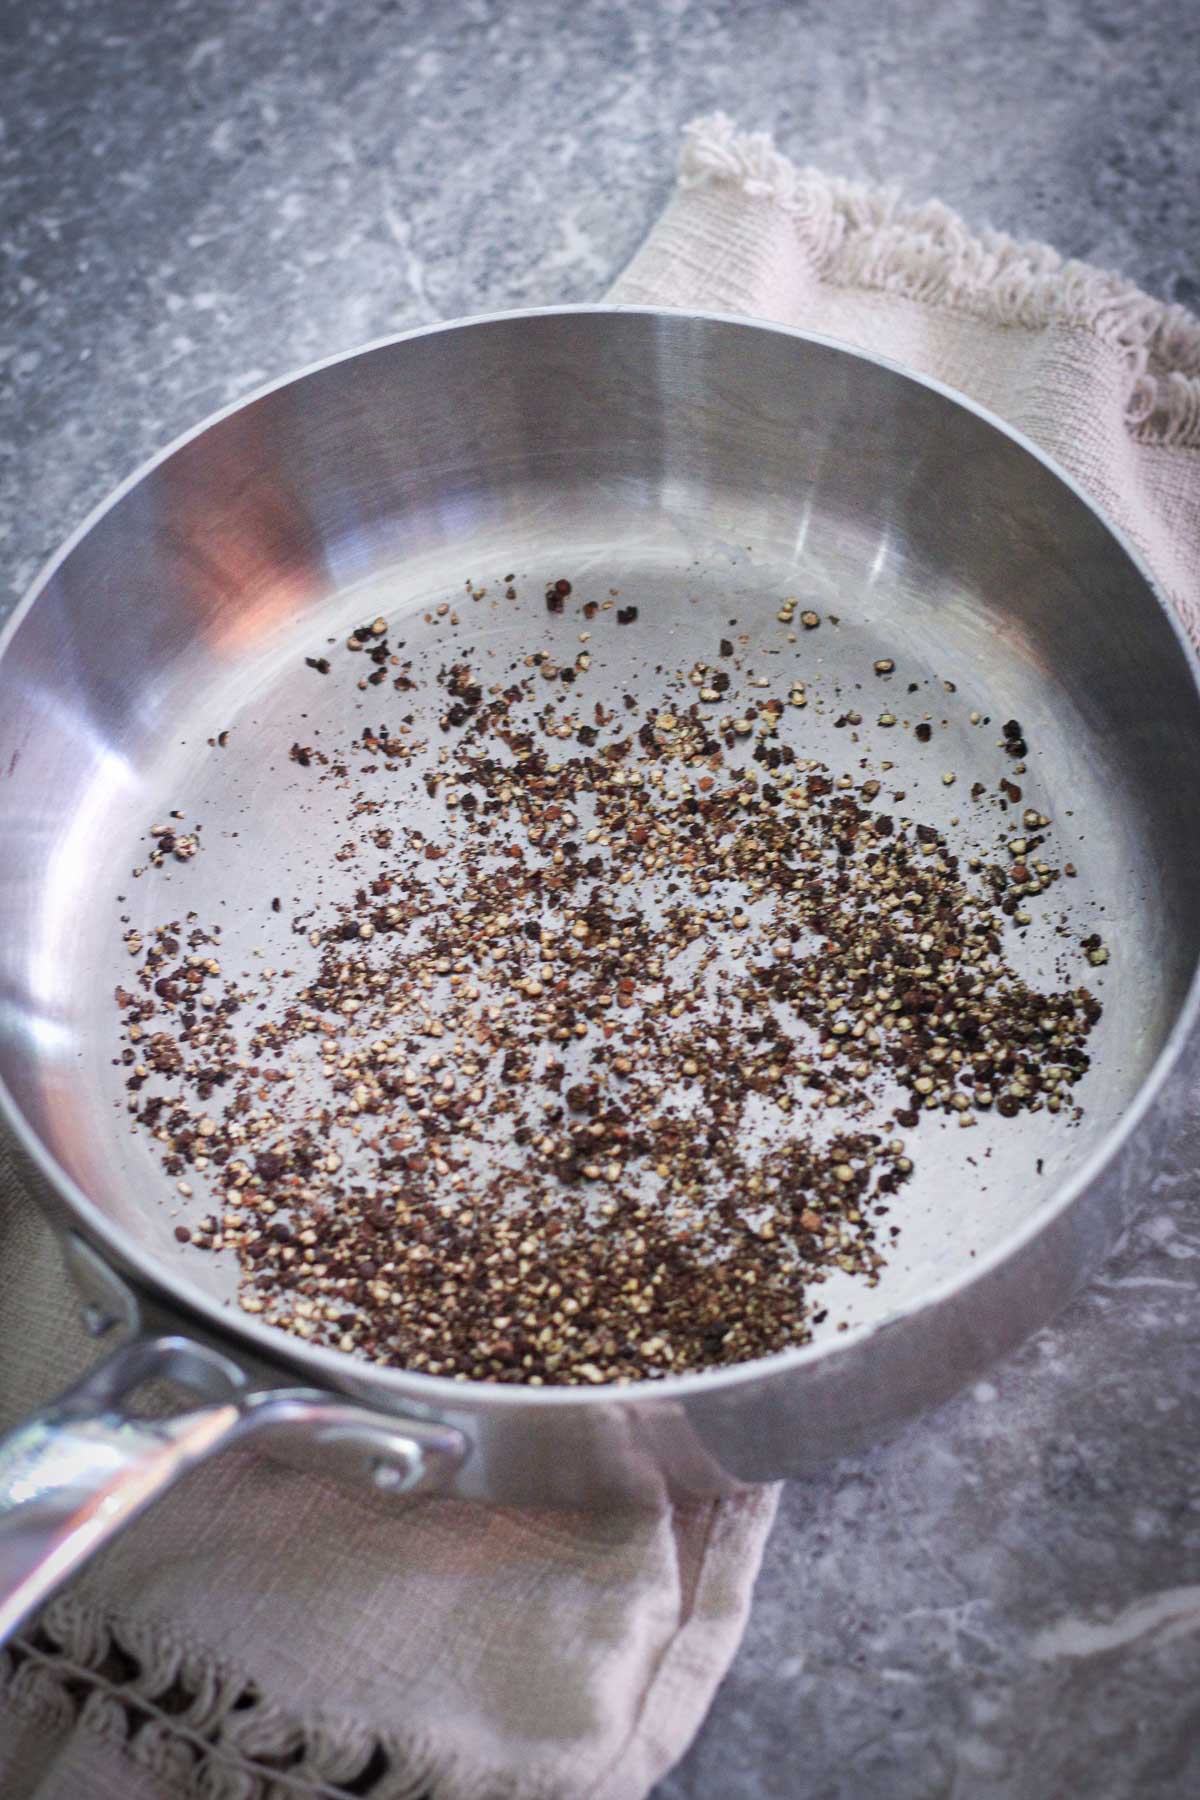 Toasting ground peppercorn in a pan.